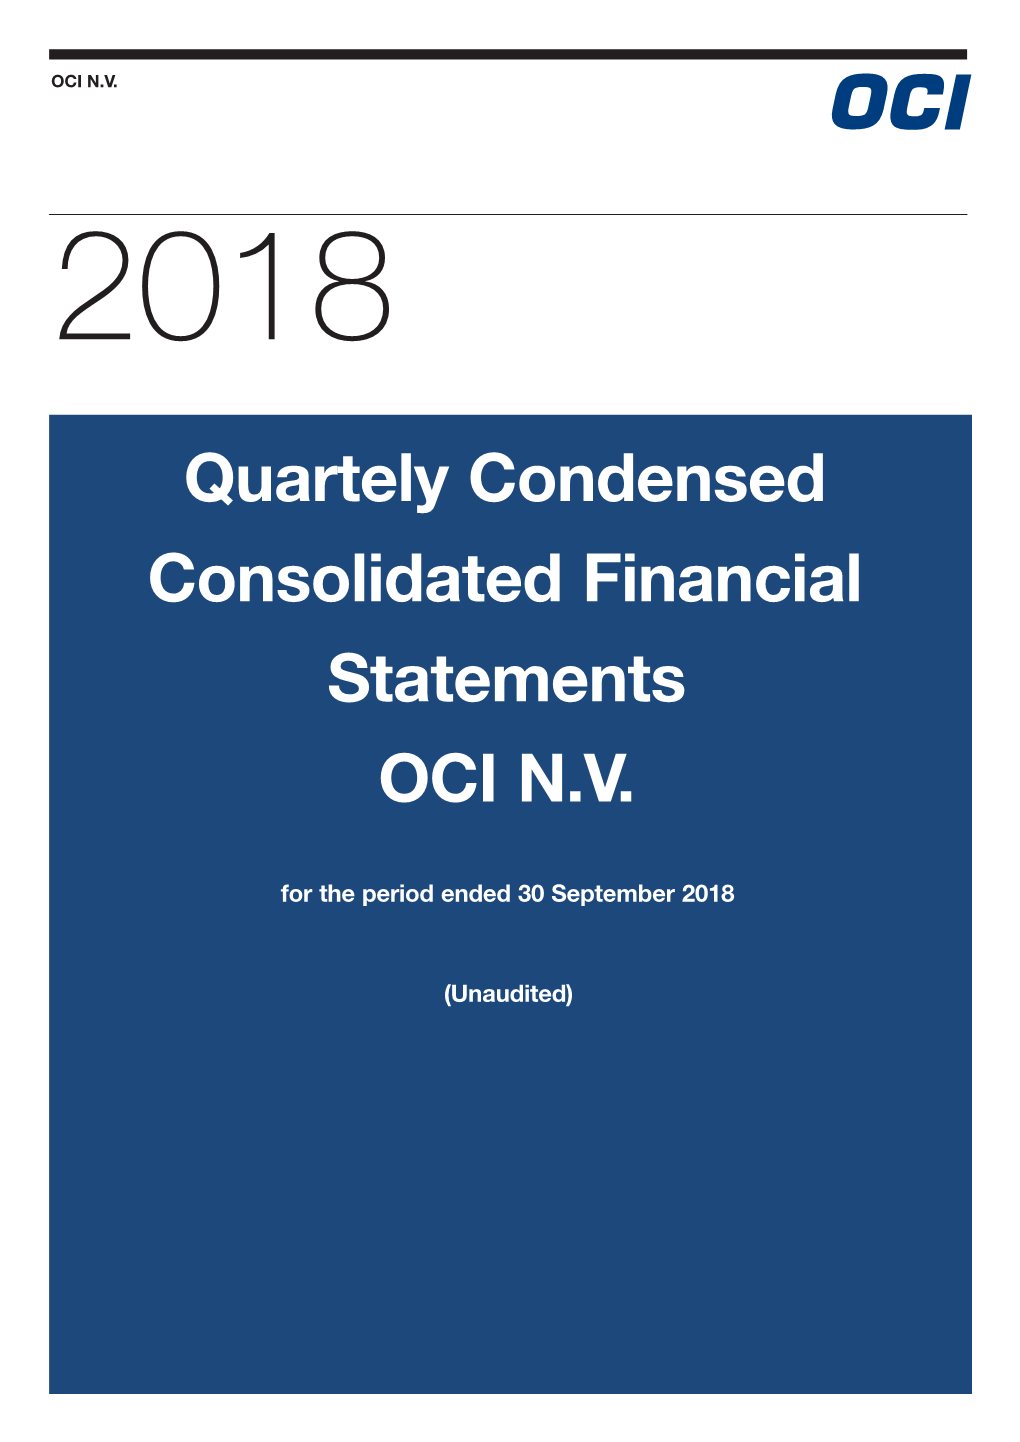 Quartely Condensed Consolidated Financial Statements OCI N.V